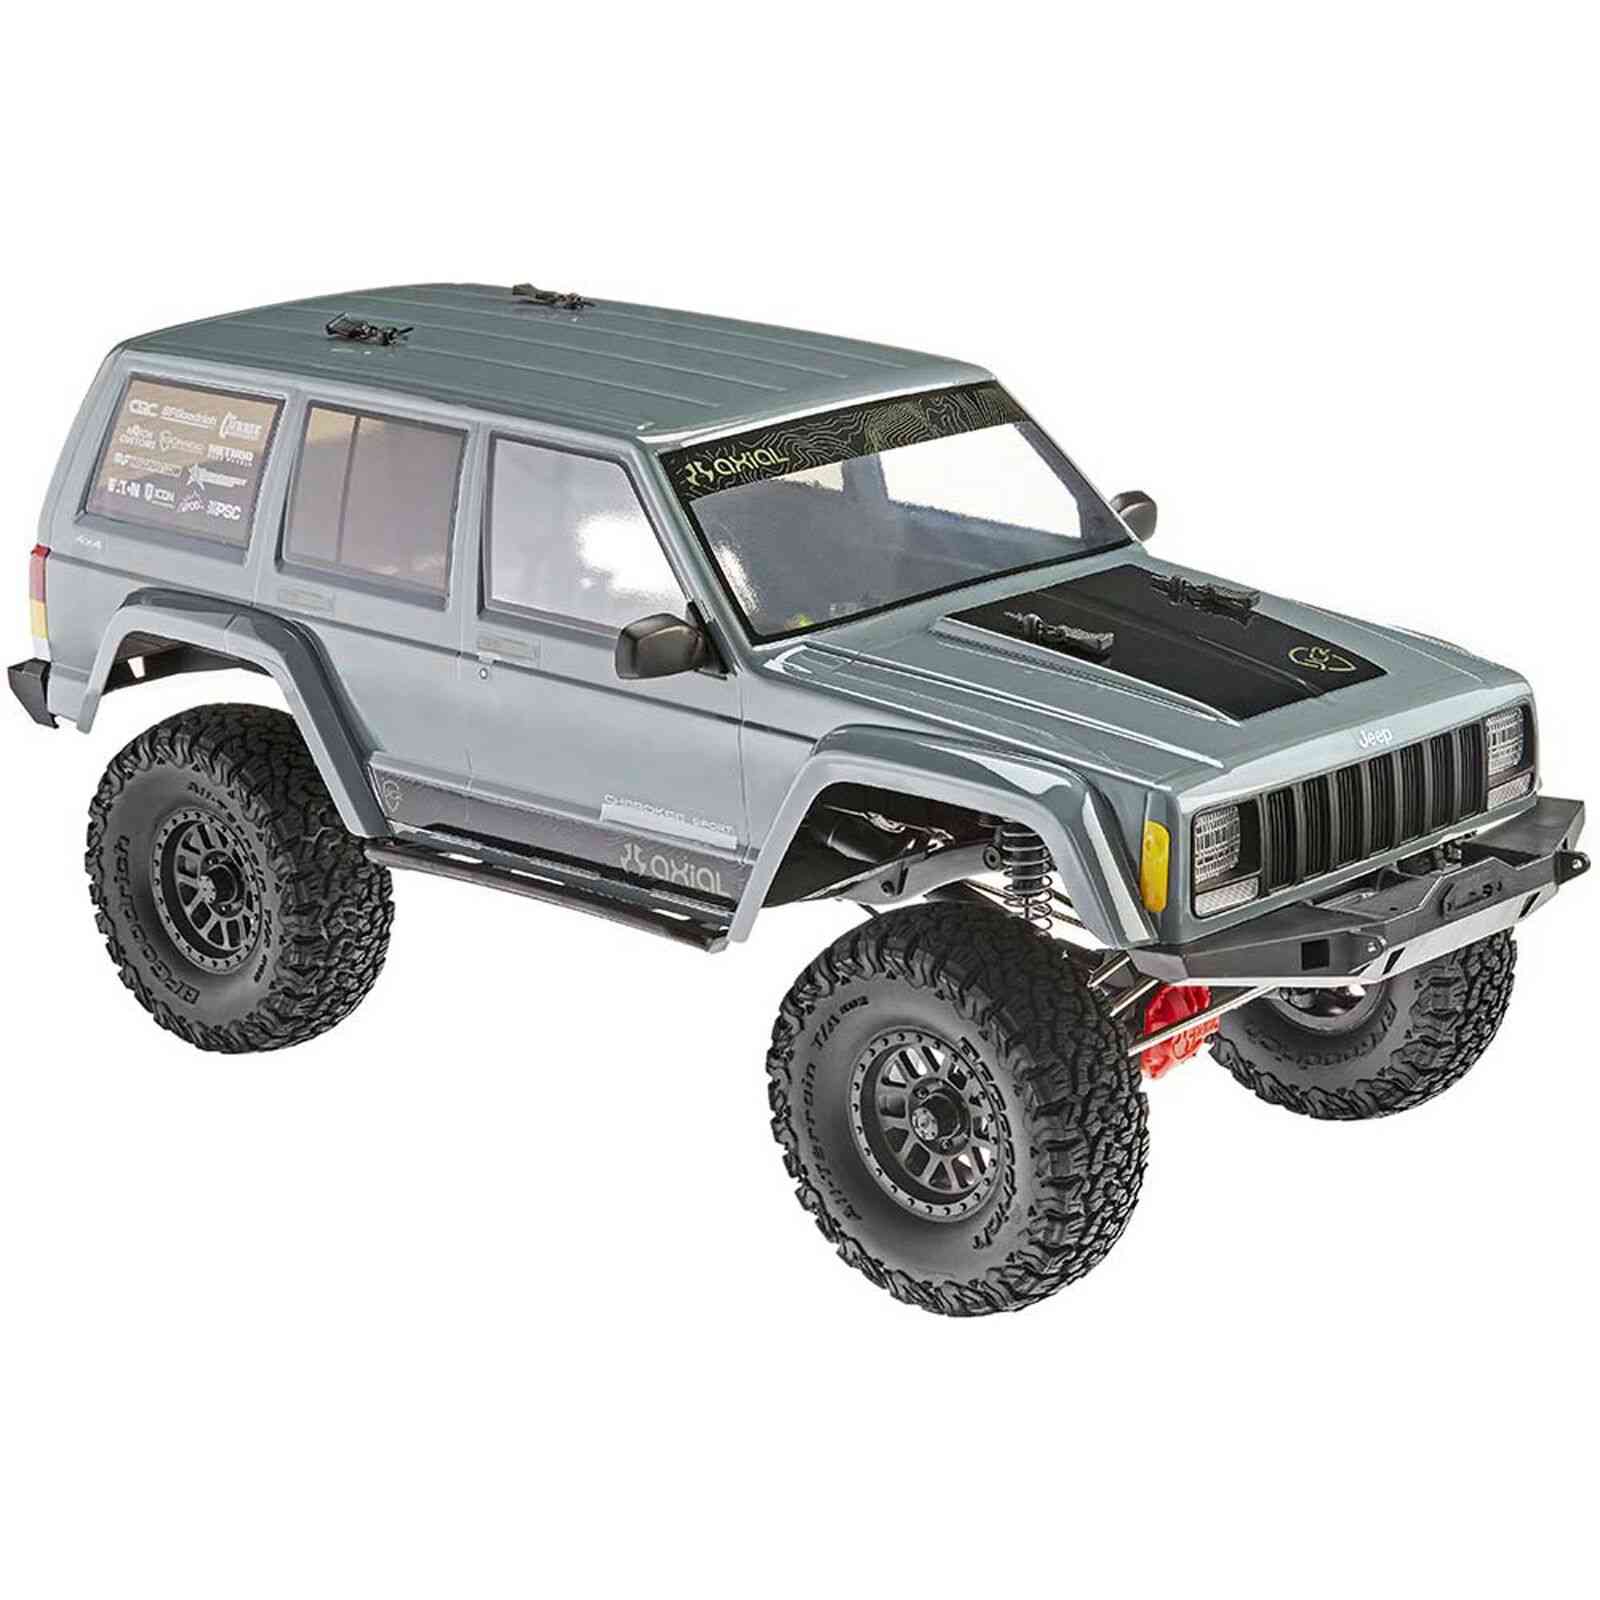 Axial SCX10 II 2000 Jeep Cherokee 1/10th Scale Electric 4WD